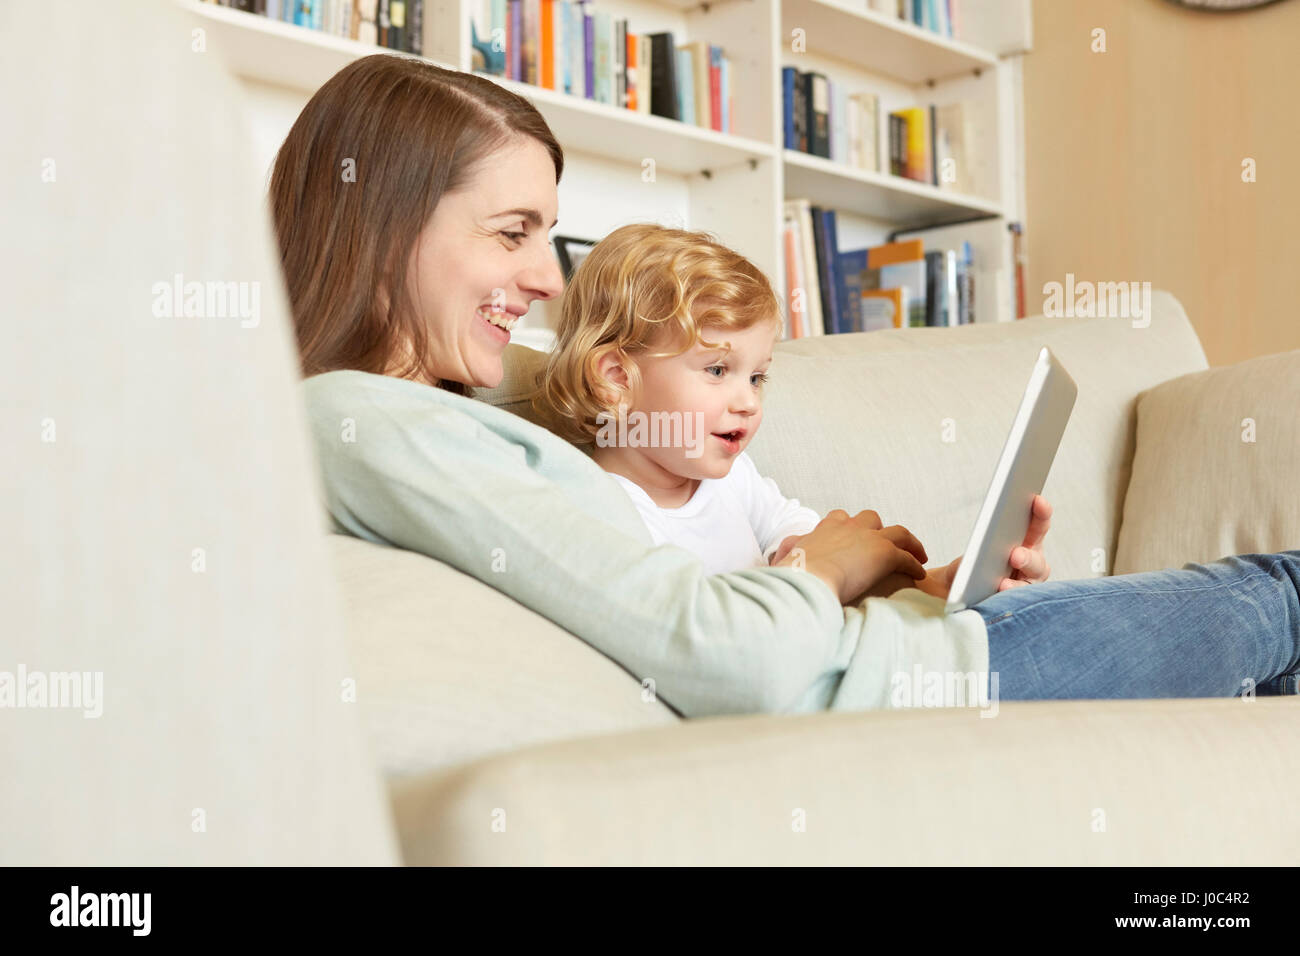 Female toddler sitting on sofa with mother looking at digital tablet Stock Photo